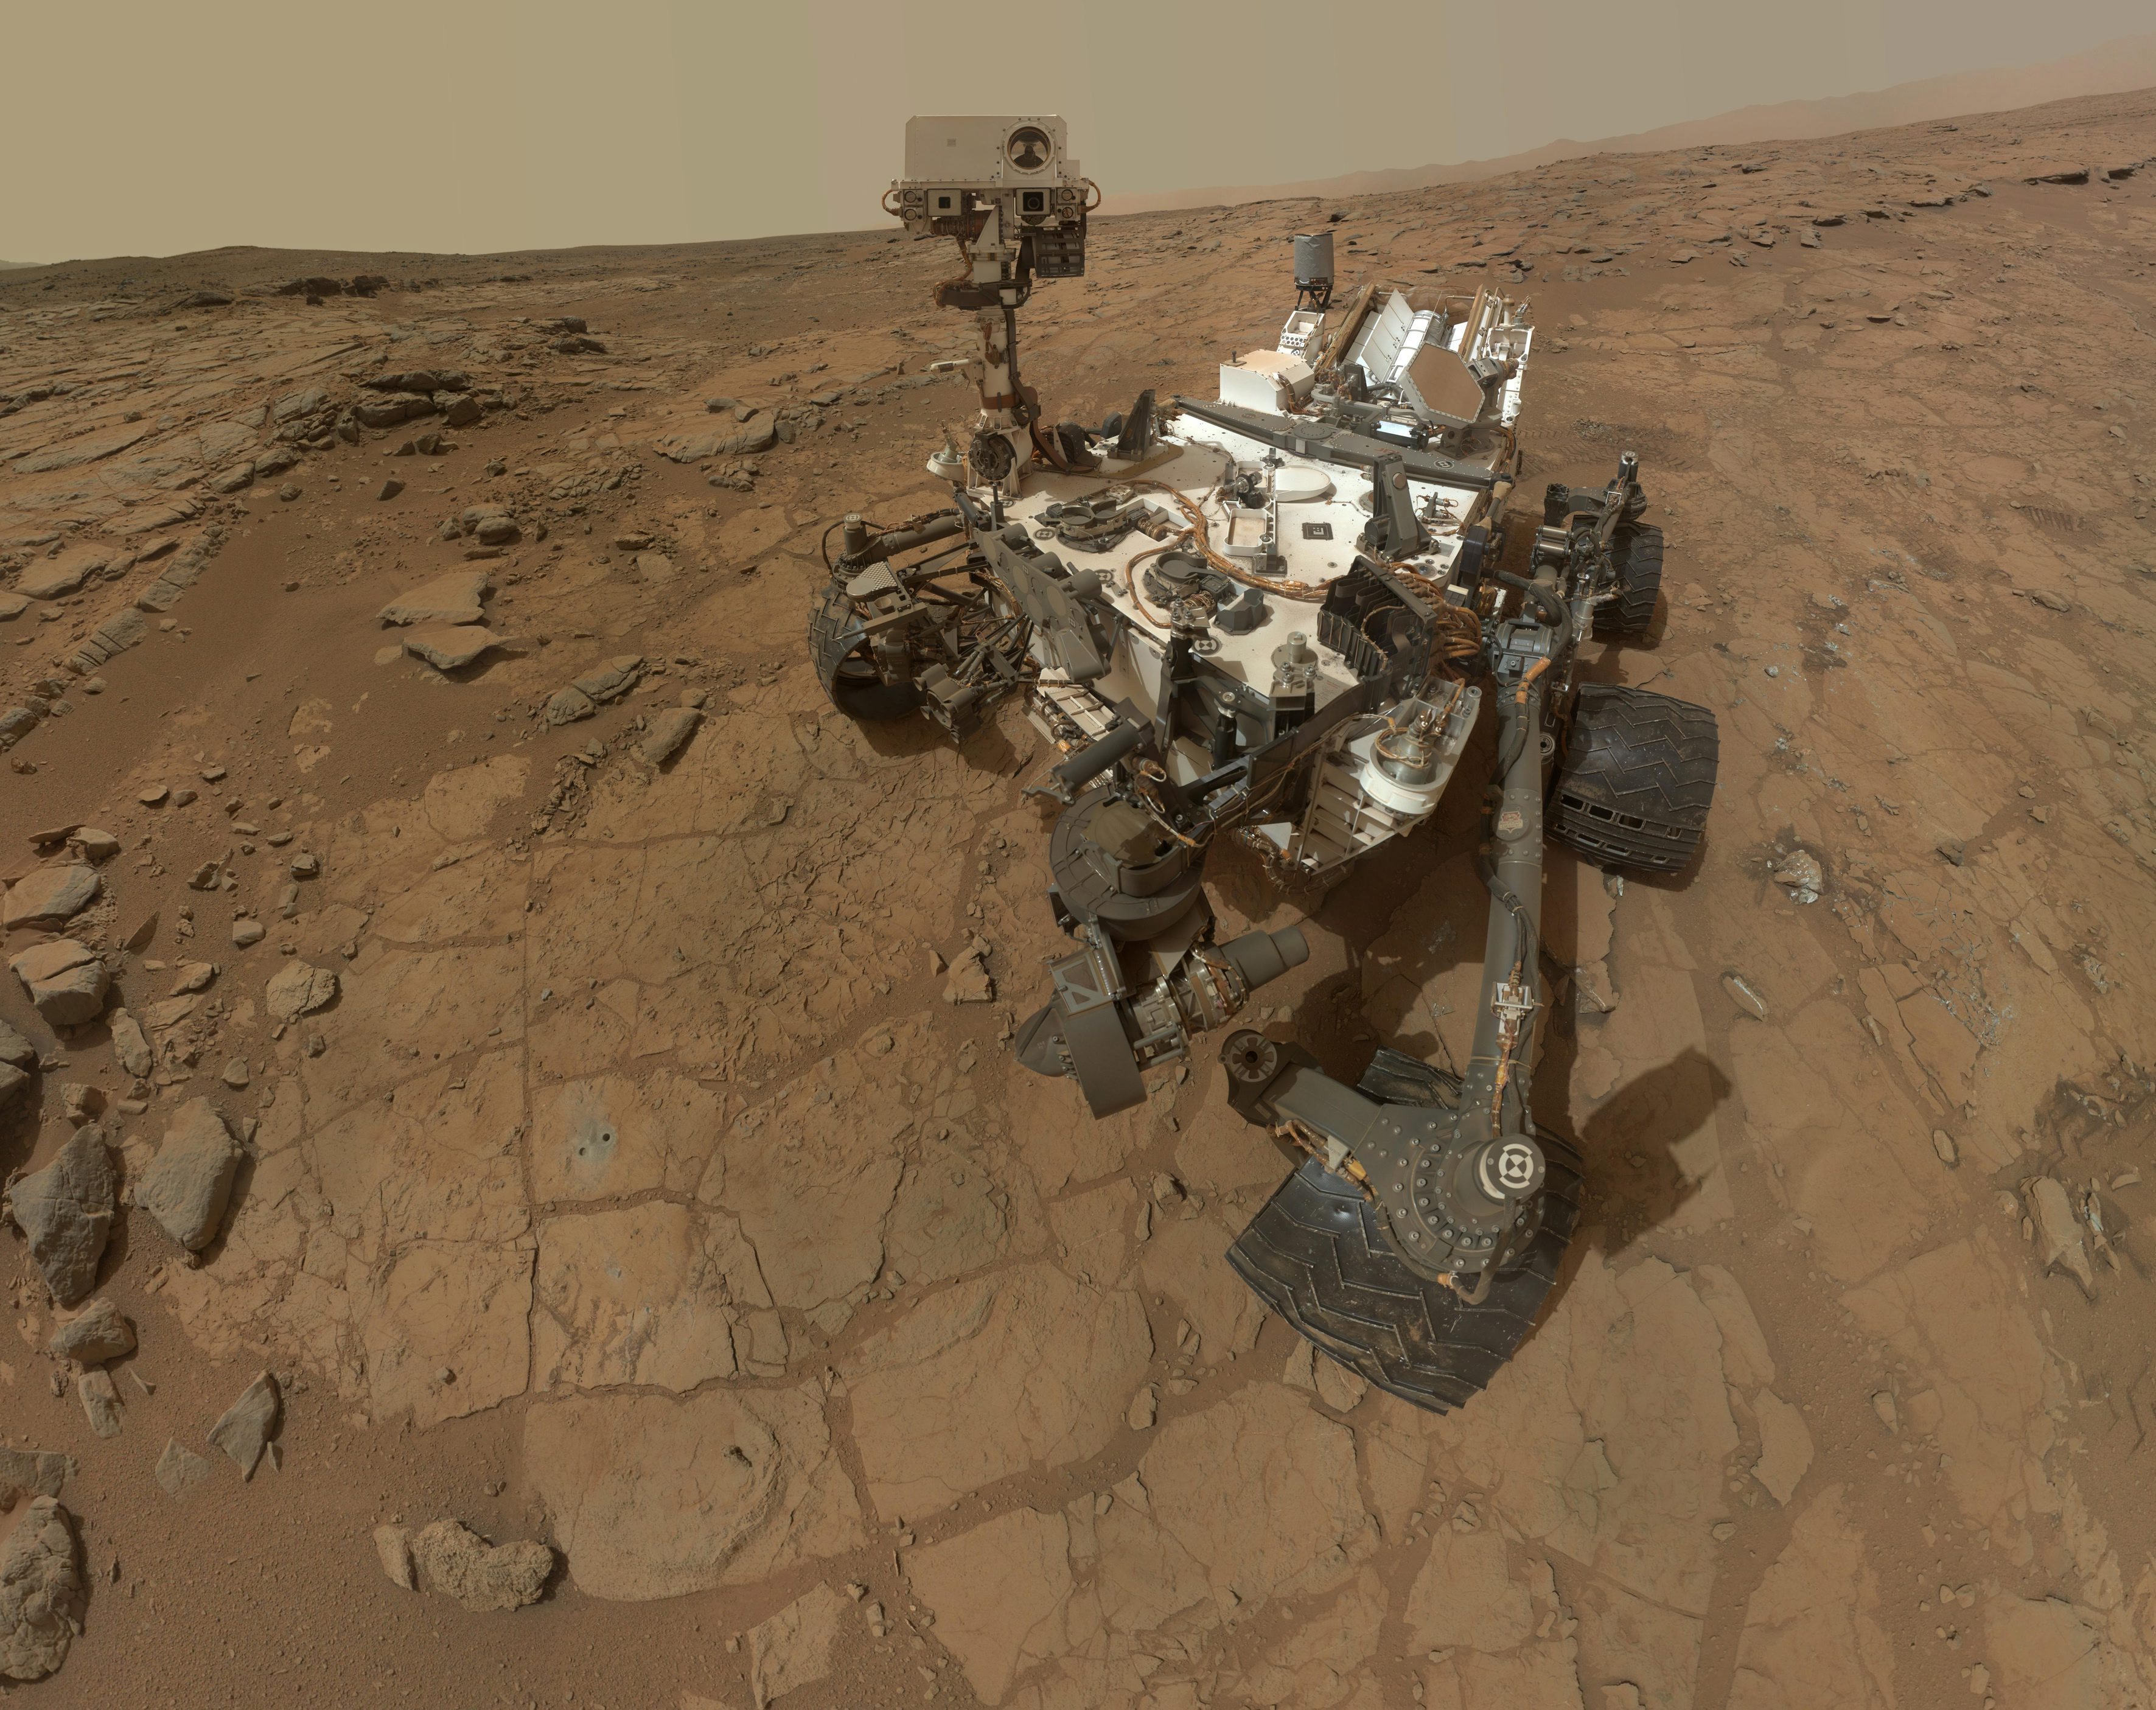 NASA found signs of life on Mars in the 1970s, says scientist